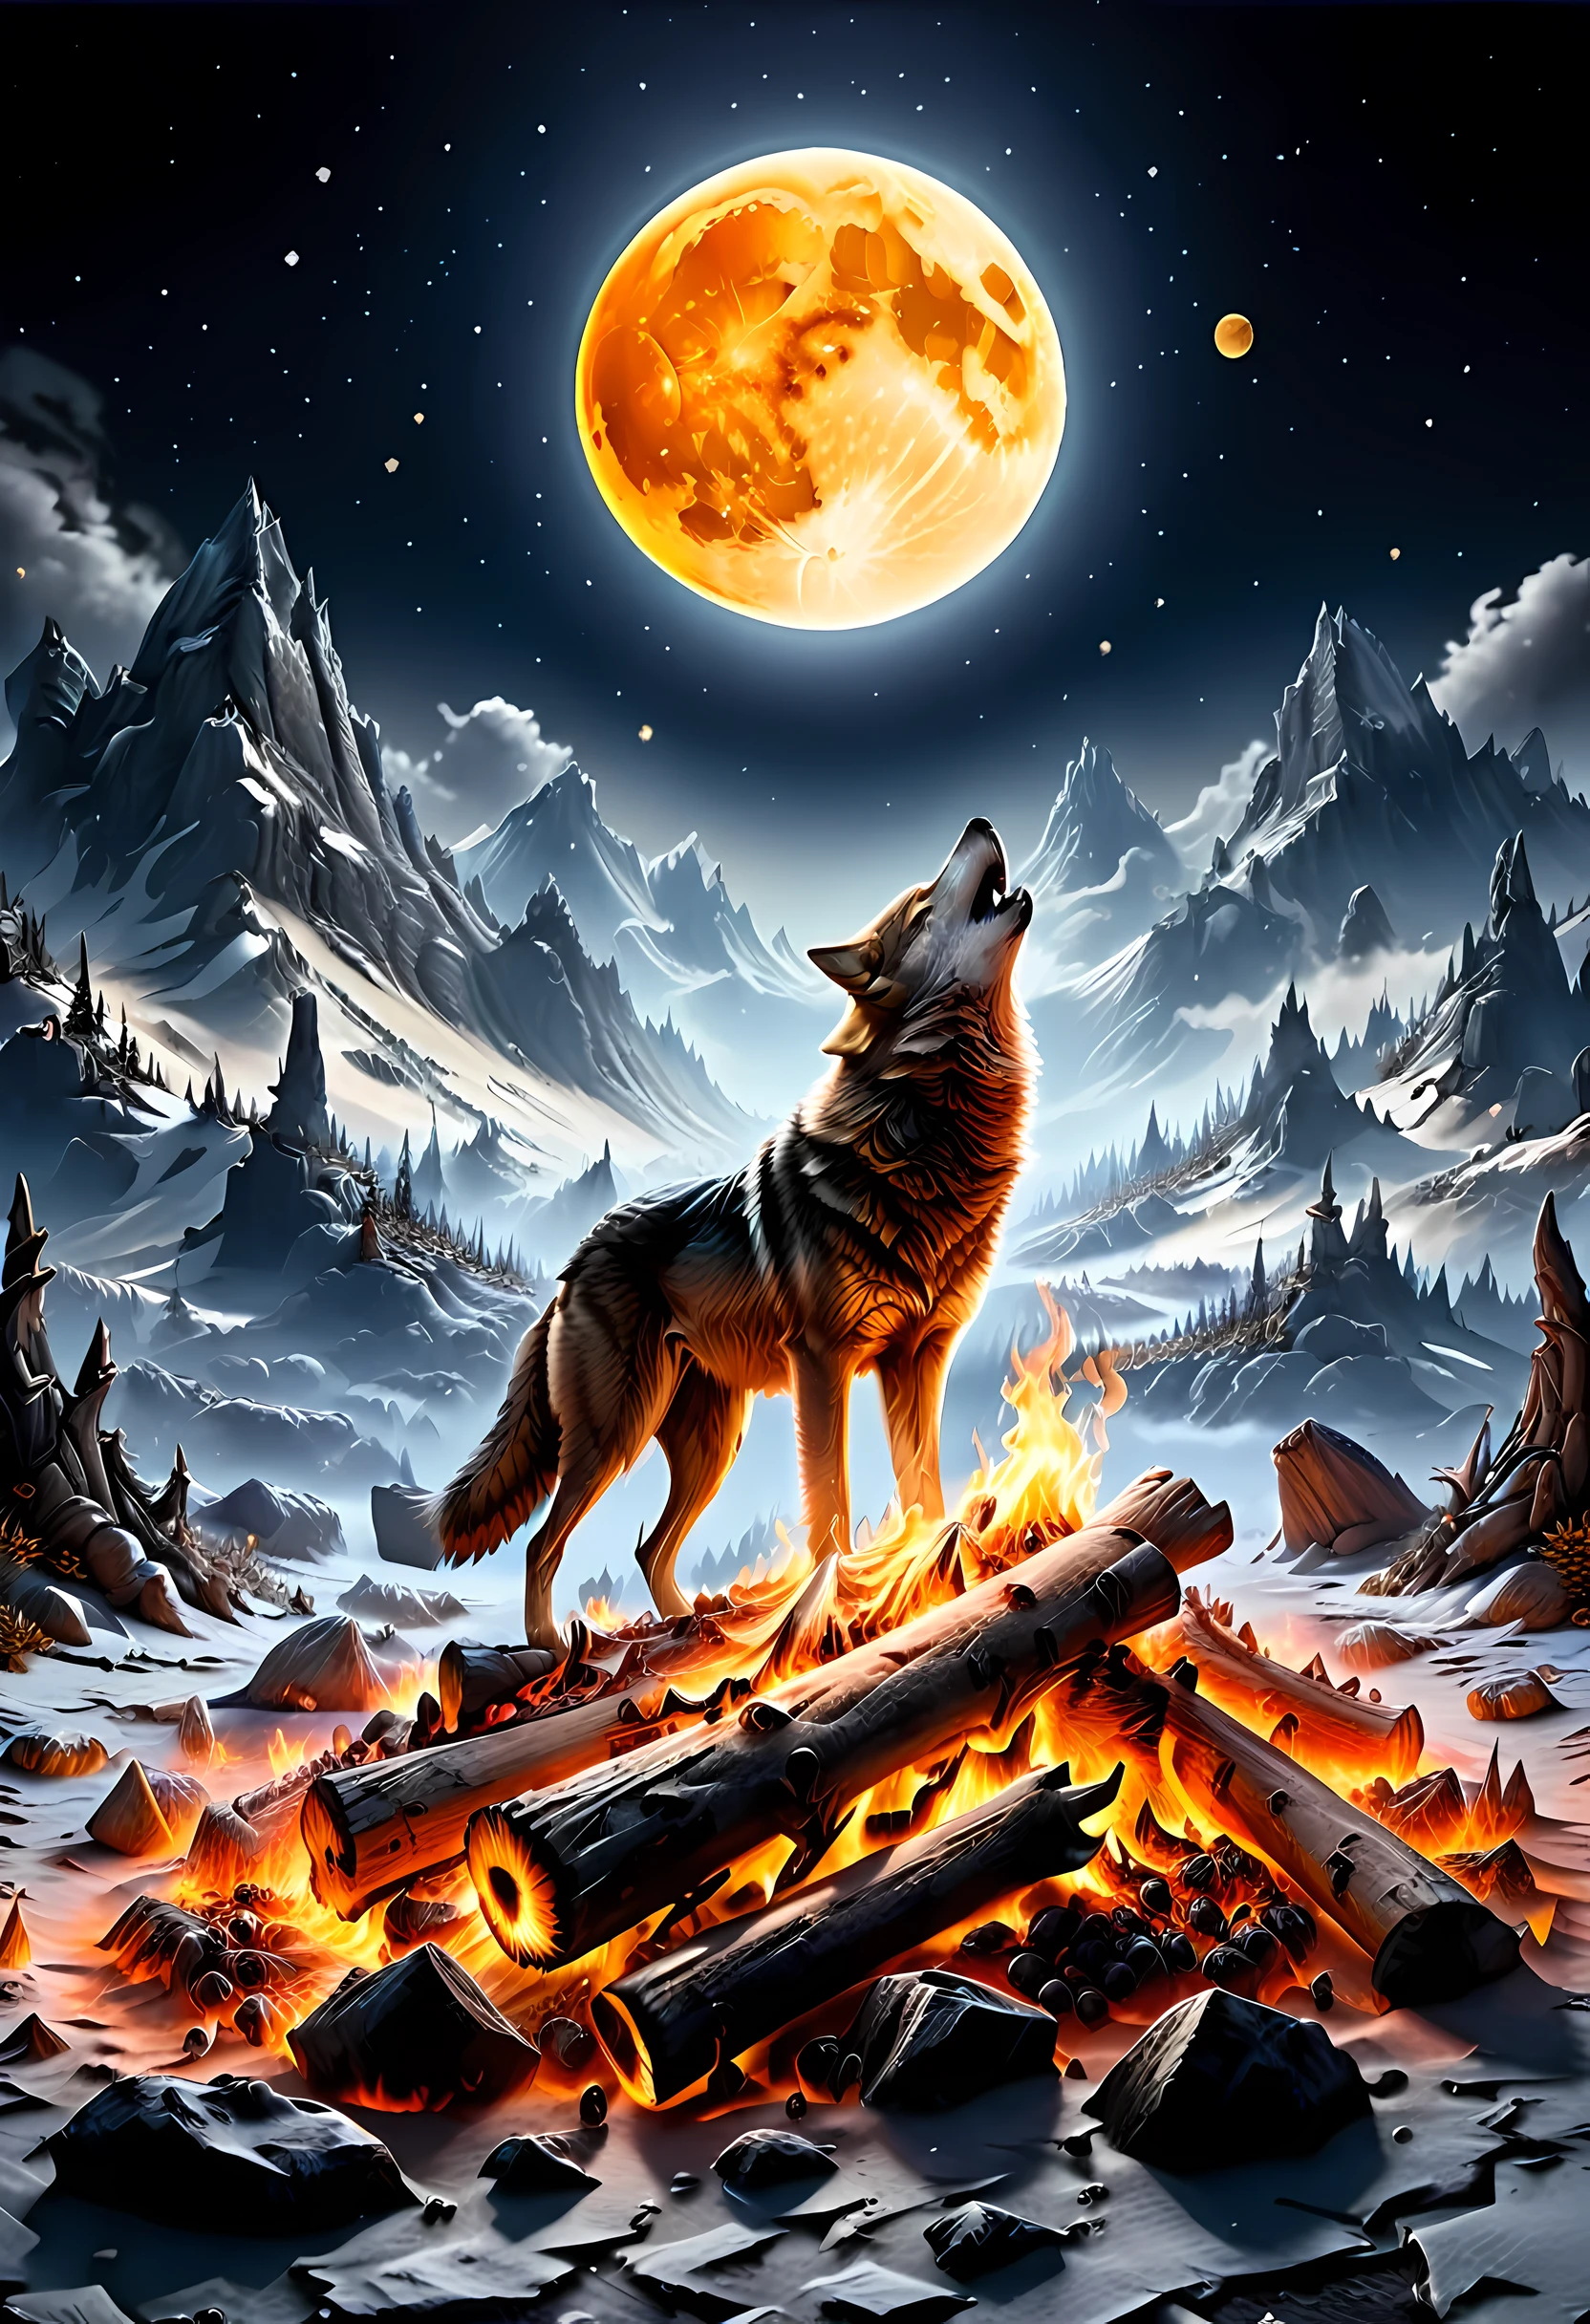 drkfntasy, faize, BJ_Full_Moon a National Geographic style, picture of bonfire at dawn on top of snowy mountain, you can see the moon  and the stars, an image of a wolf howling in the background, high details, best quality, highres, ultra wide angle